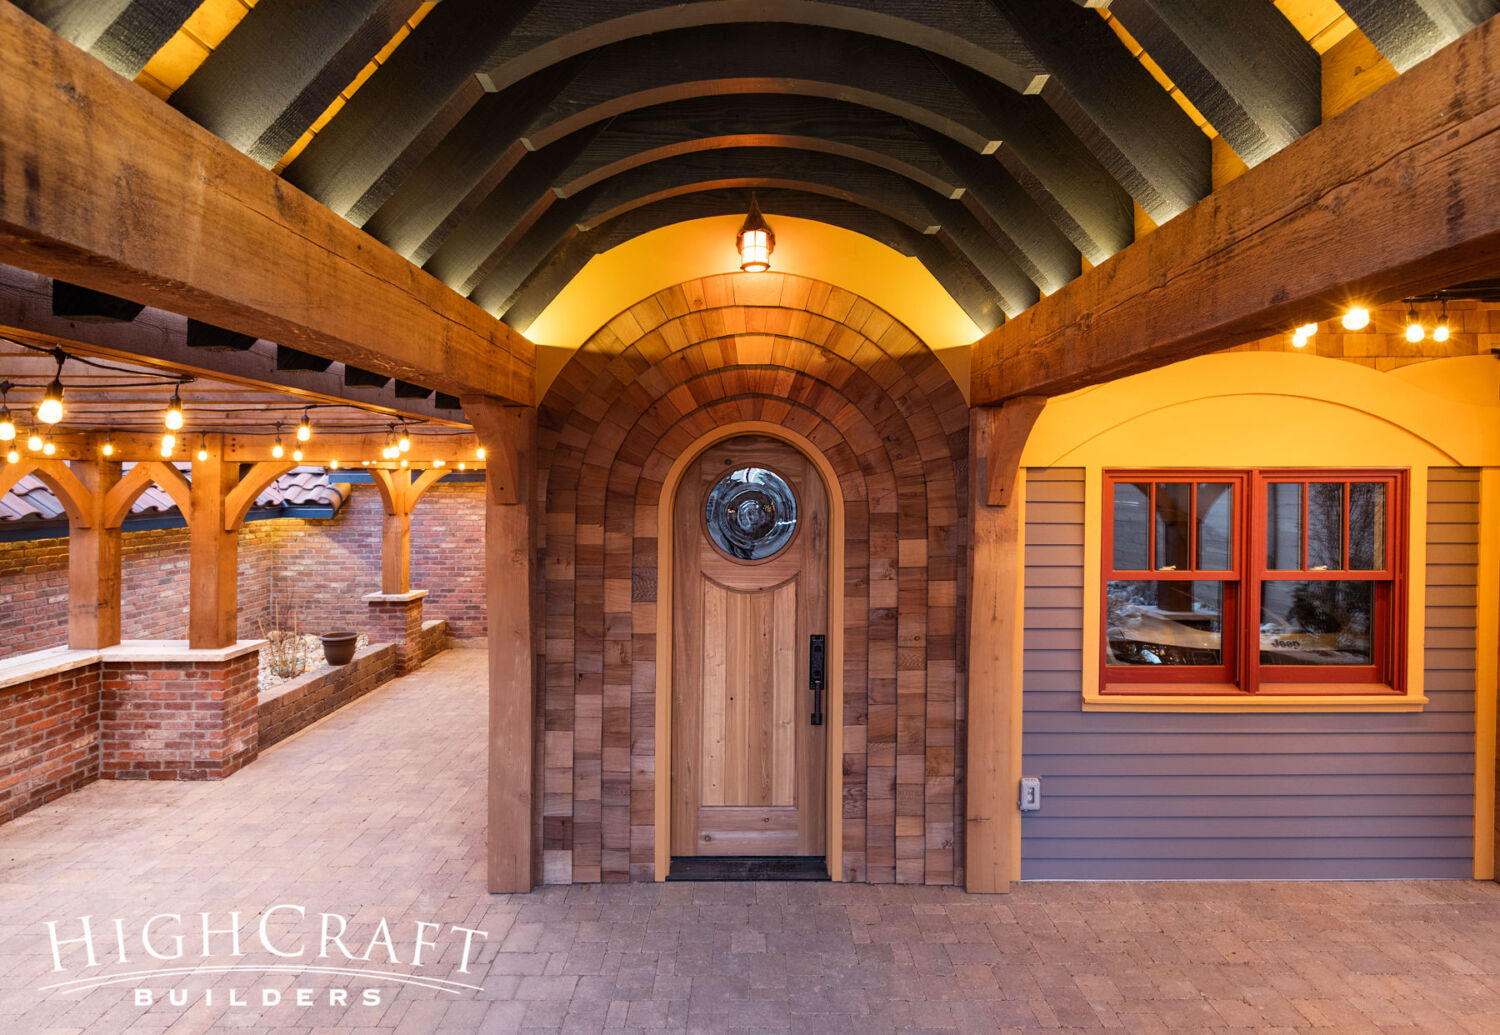 Eclectic-Remodel-in-Old-Town-Custom-Arched-Entry-Door-with-Curved-Trusses